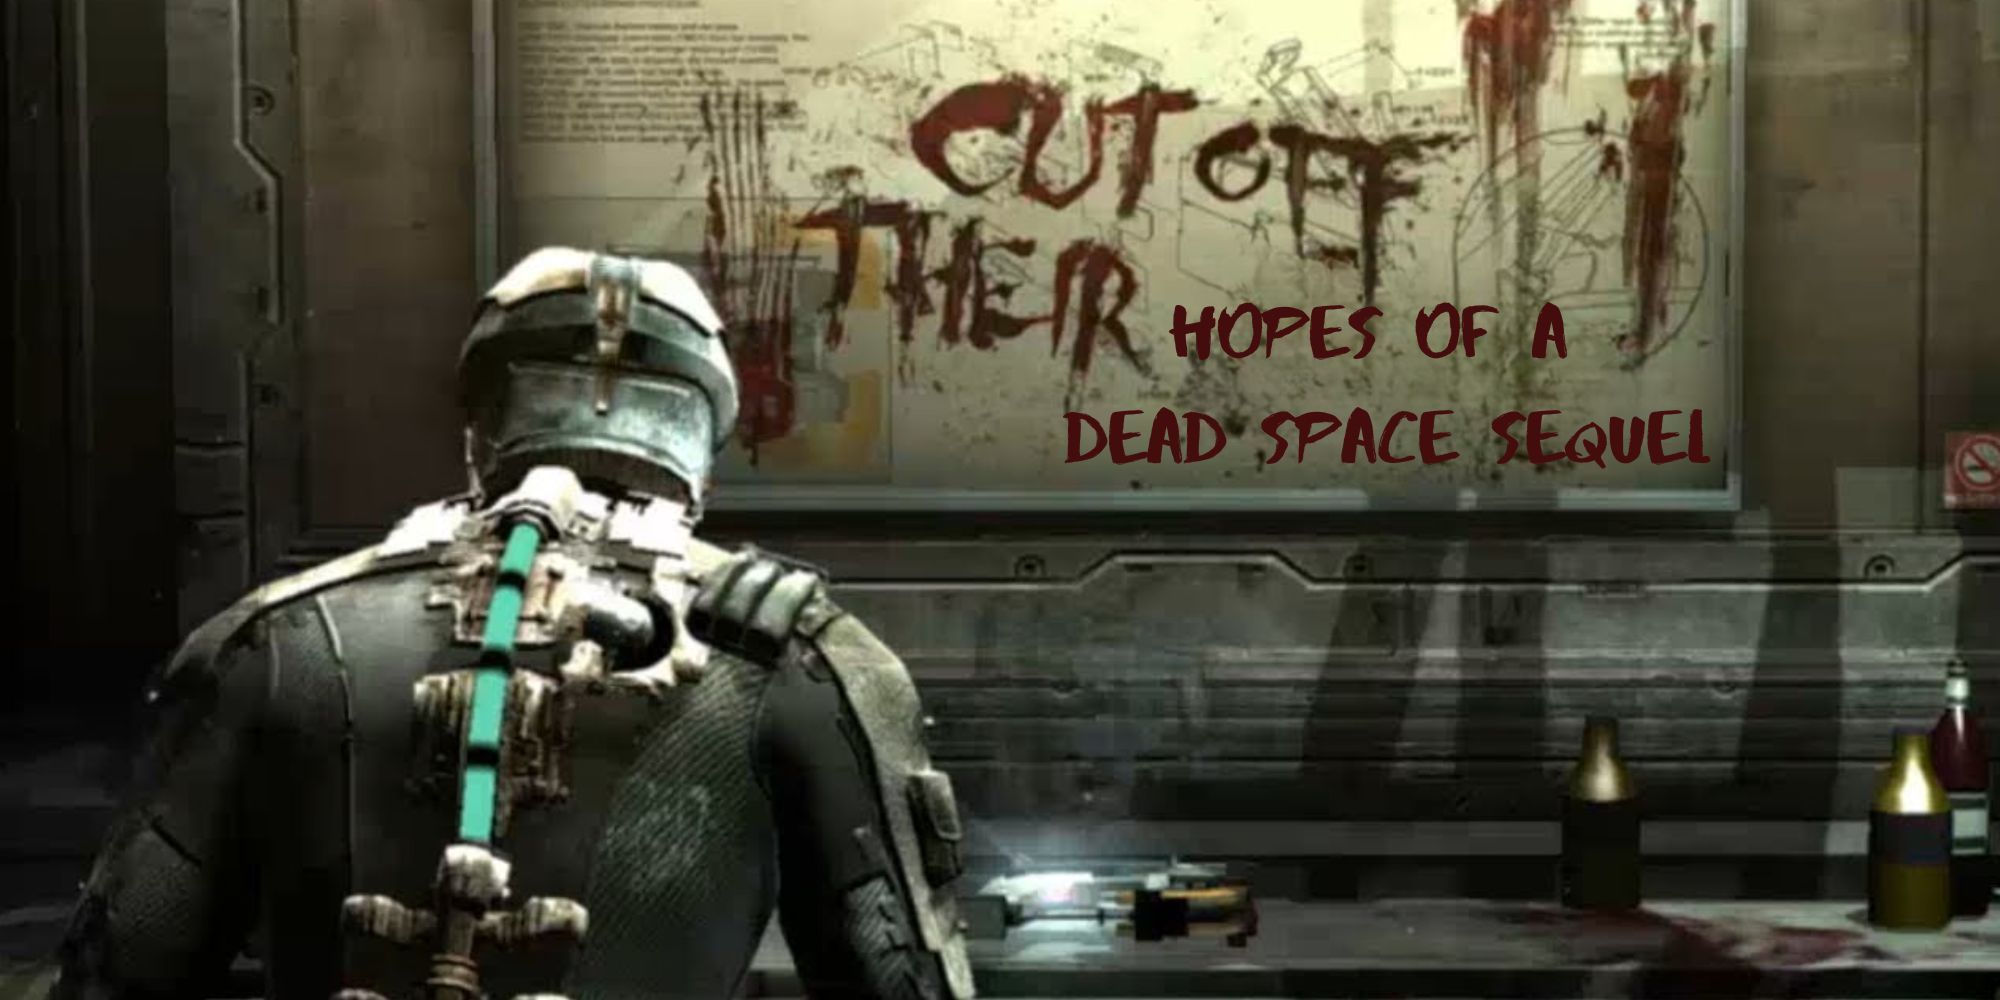 Dead Space's Cut Off Their Limbs but it says 'cut off their hopes of a dead space sequel'